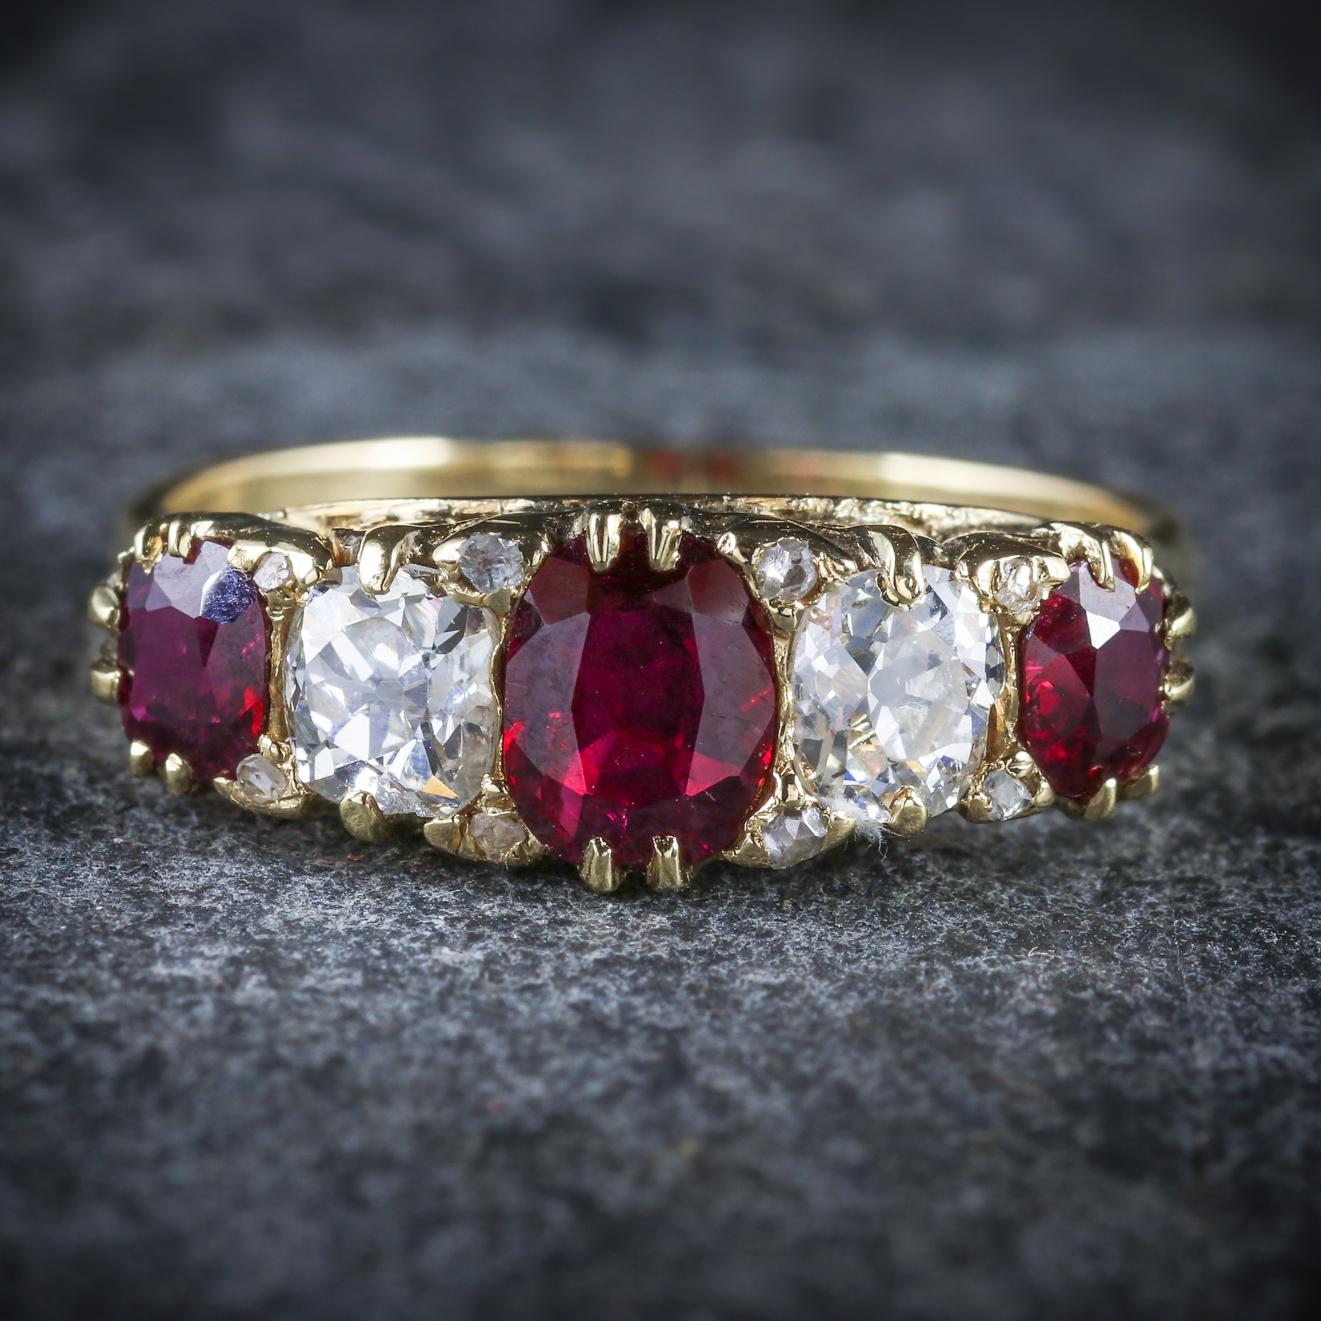 This breathtaking antique Ruby and Diamond ring is Victorian, Circa 1900

The ring is adorned with a trilogy of pigeon blood Rubies with two sparkling old cut Diamonds in-between

The central Ruby is 0.65ct, the outer are 0.45ct with 1ct of Diamond